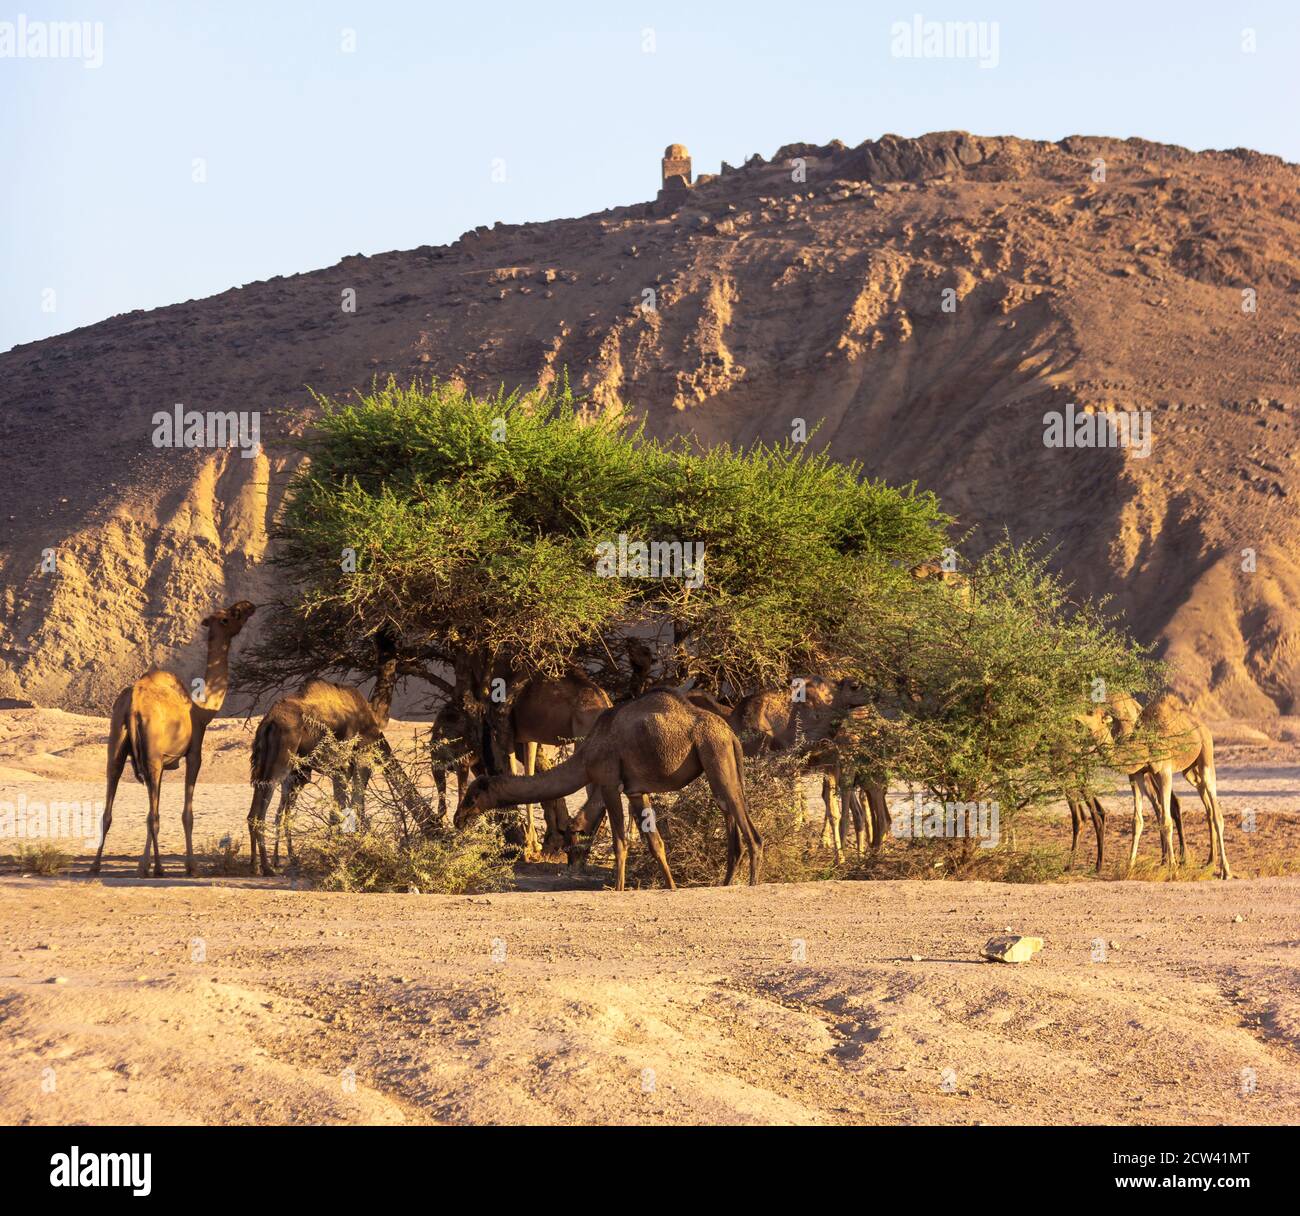 Dromedary camels (Camelus dromedaries) are rarely found in the wild and most of those seen walking around the landscape. Stock Photo